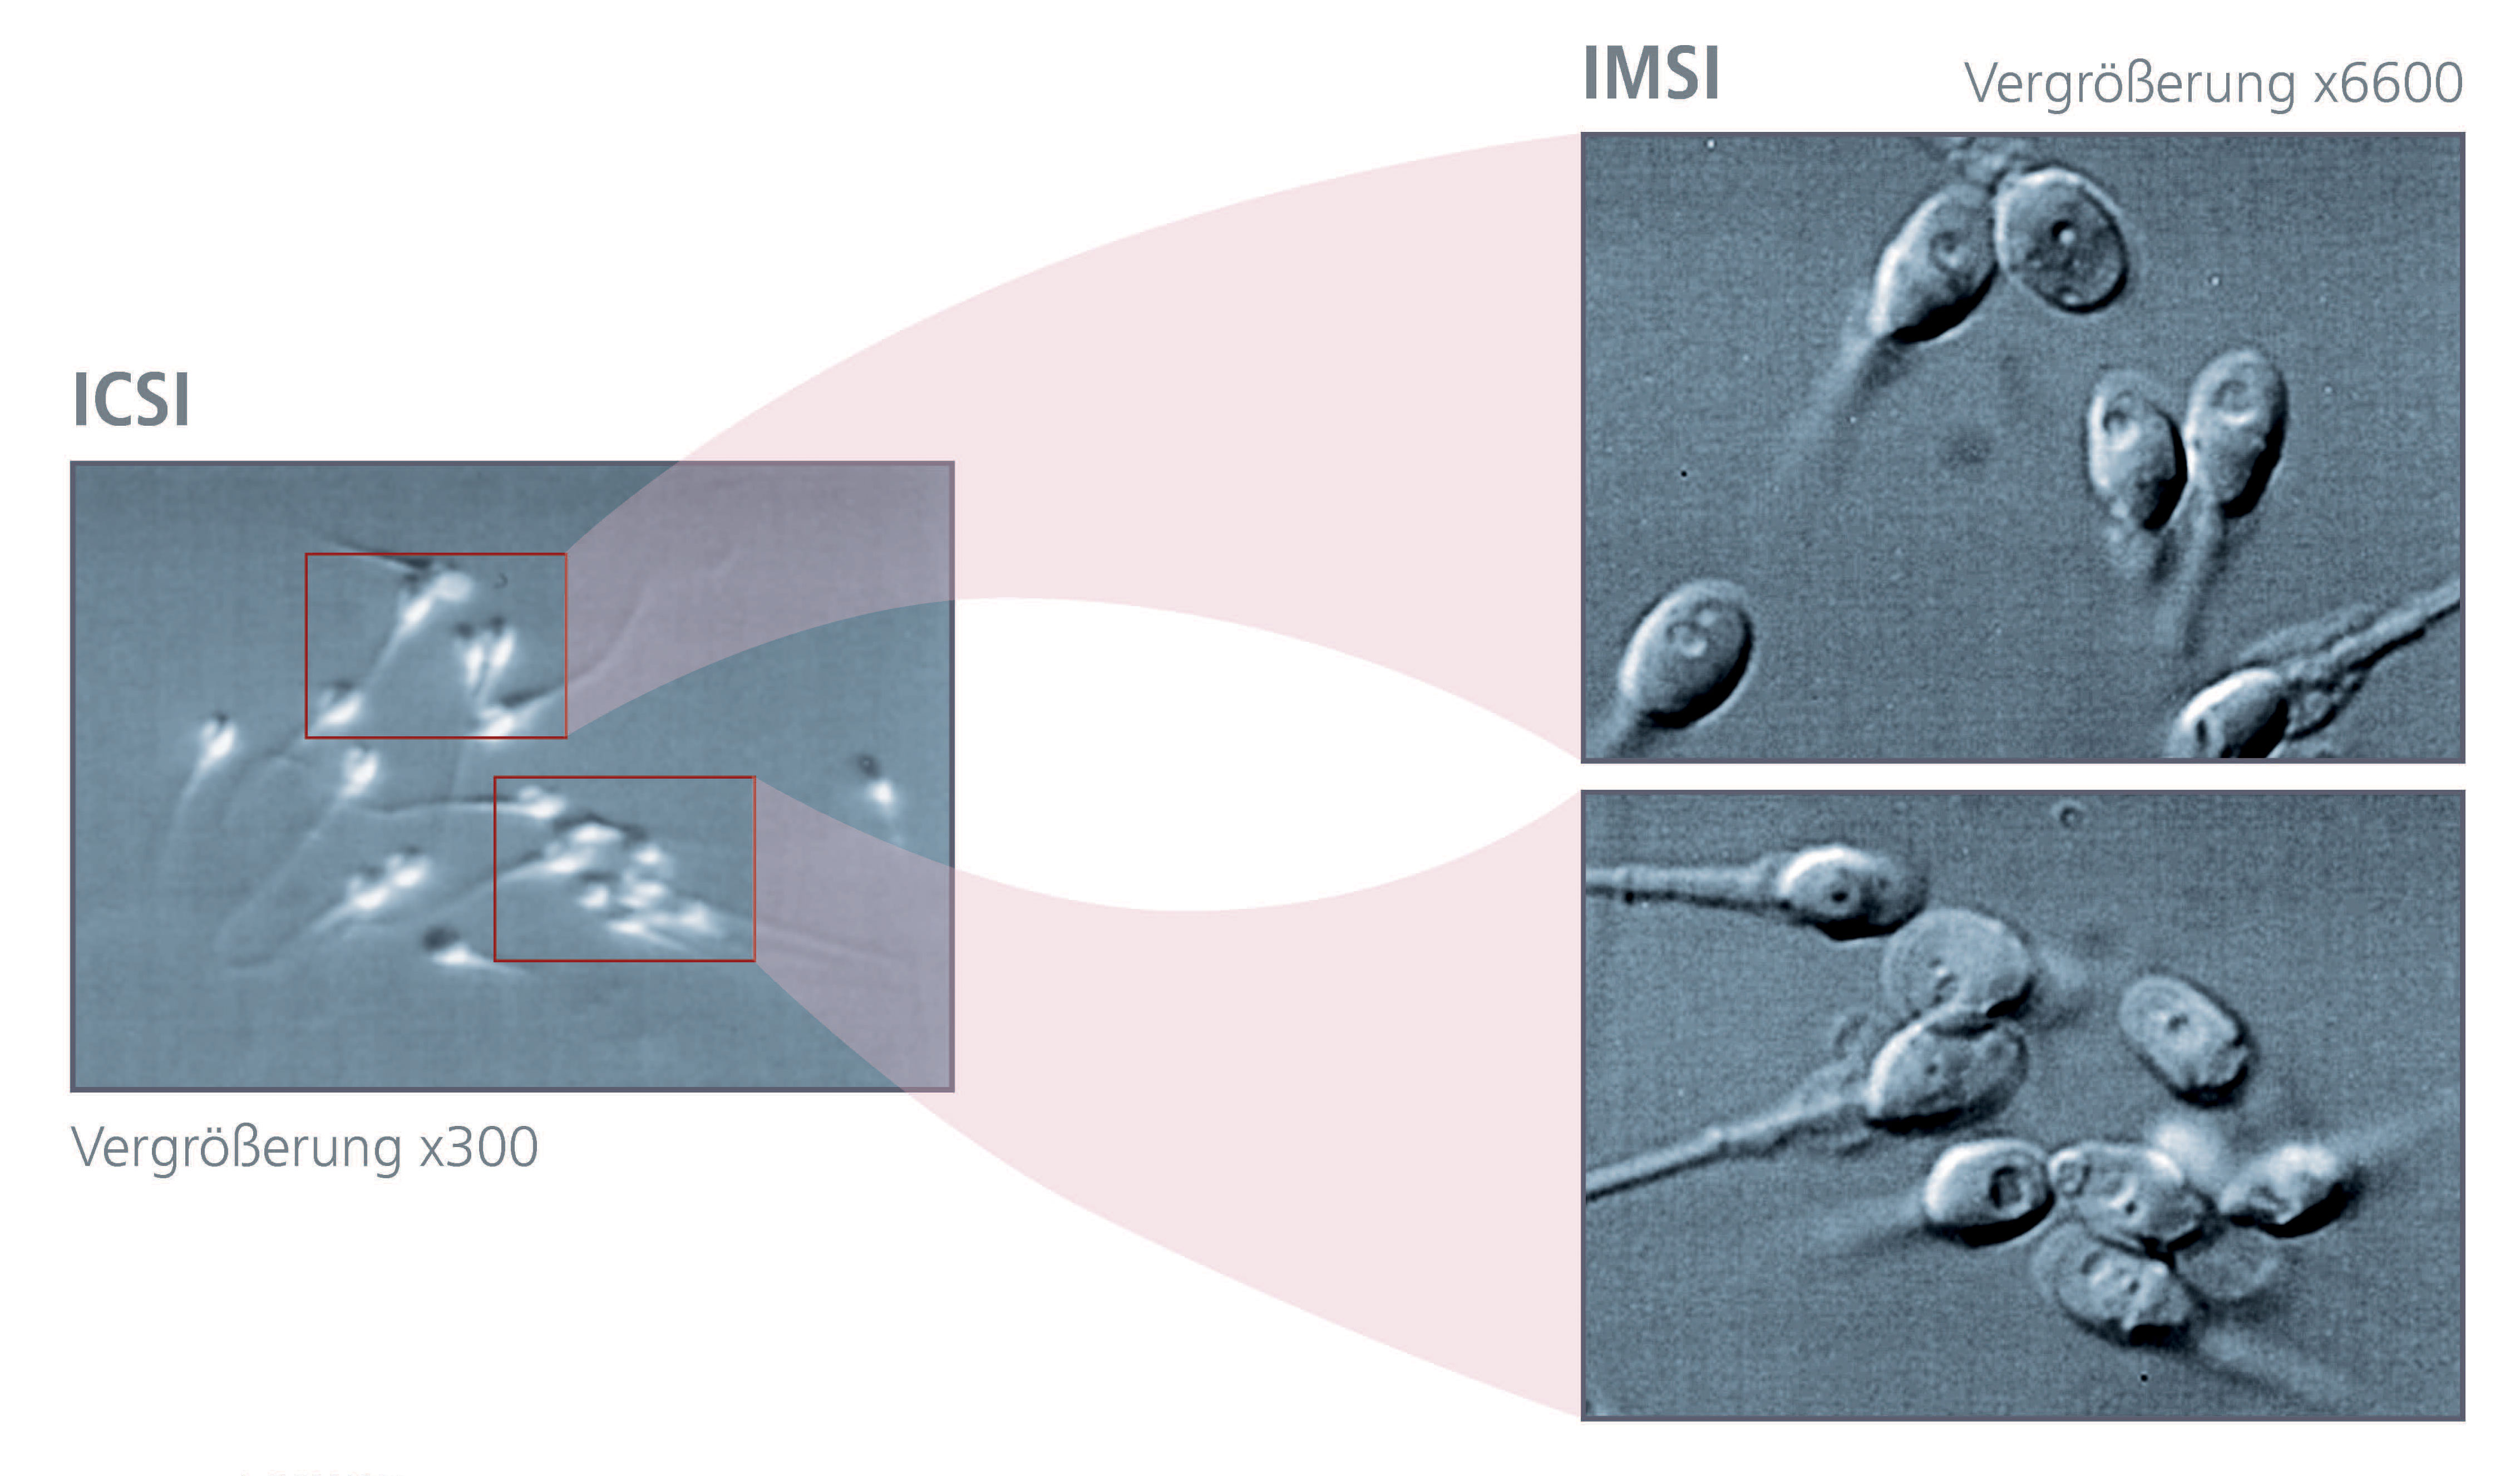 Illustration of the microscopic analysis and the procedure for selecting suitable sperm to be used for in vitro fertilization (IVF) of ova: Comparison of ICSI vs. IMSI │ © 2022 Next Fertility IVF Prof. Zech • Member of Next Clinics